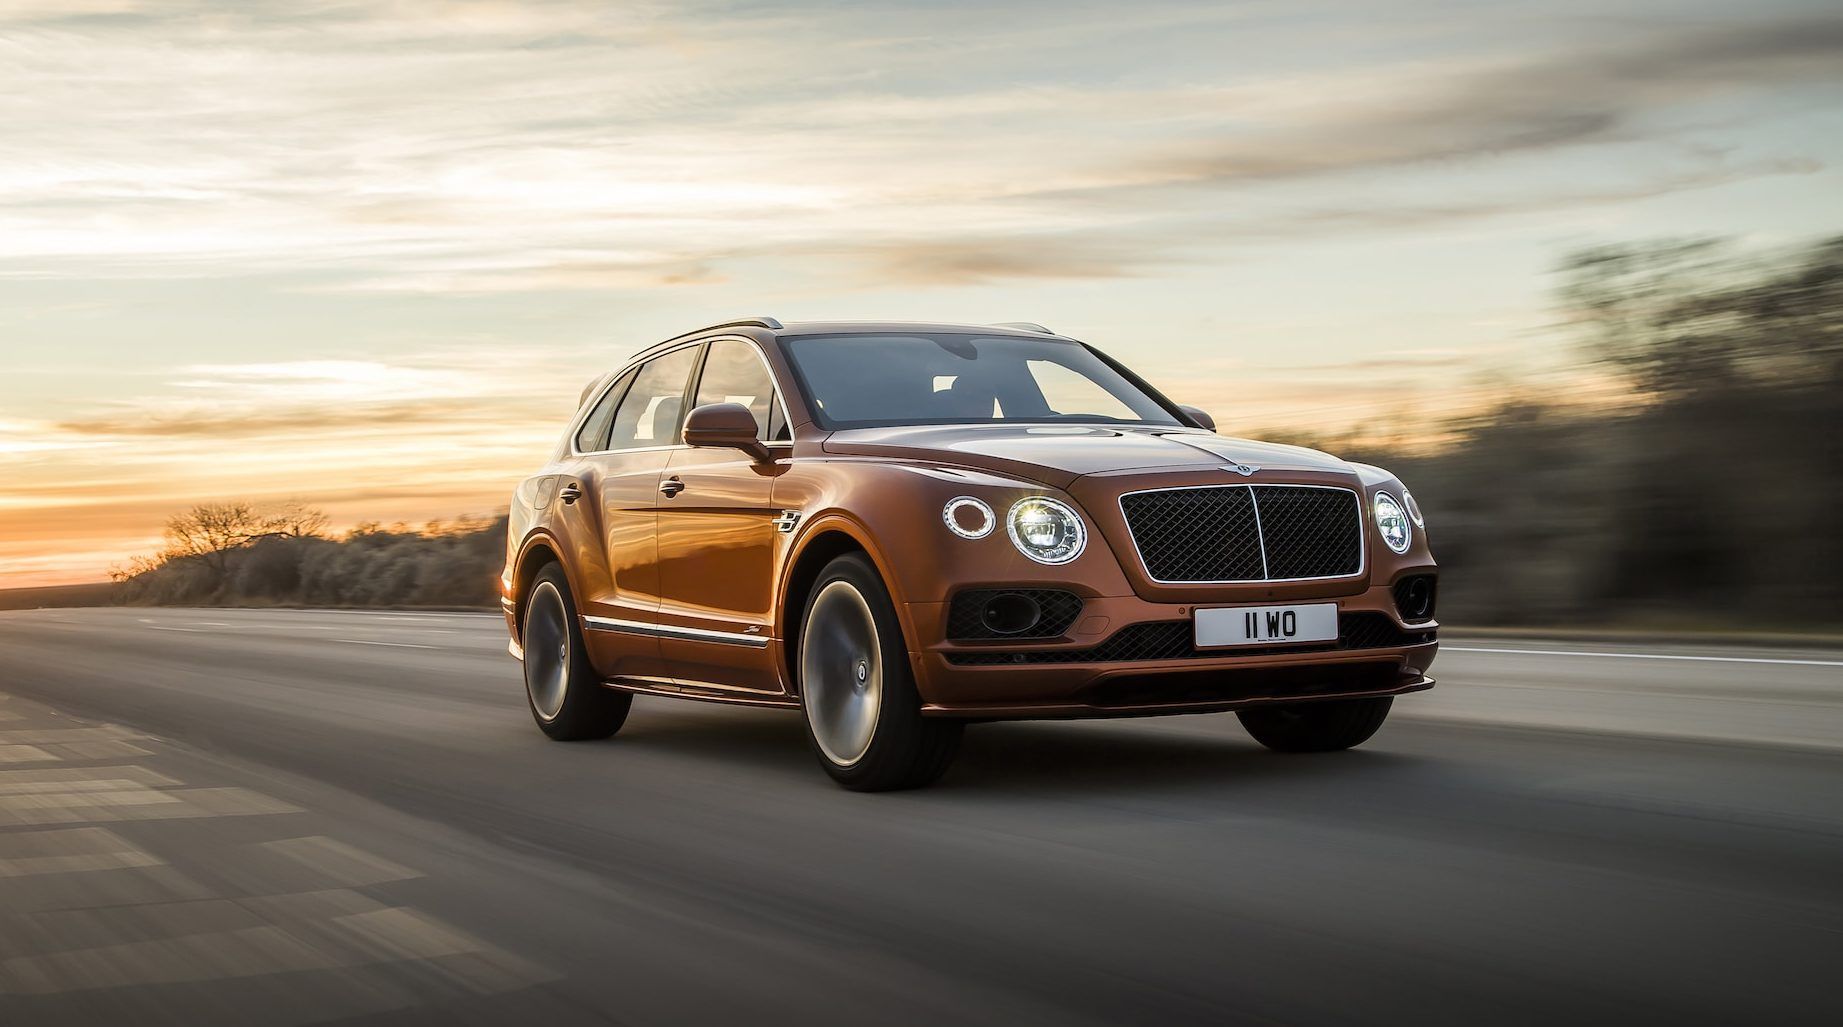 The 2020 Bentley Bentayga Speed is now the world’s fastest luxury SUV